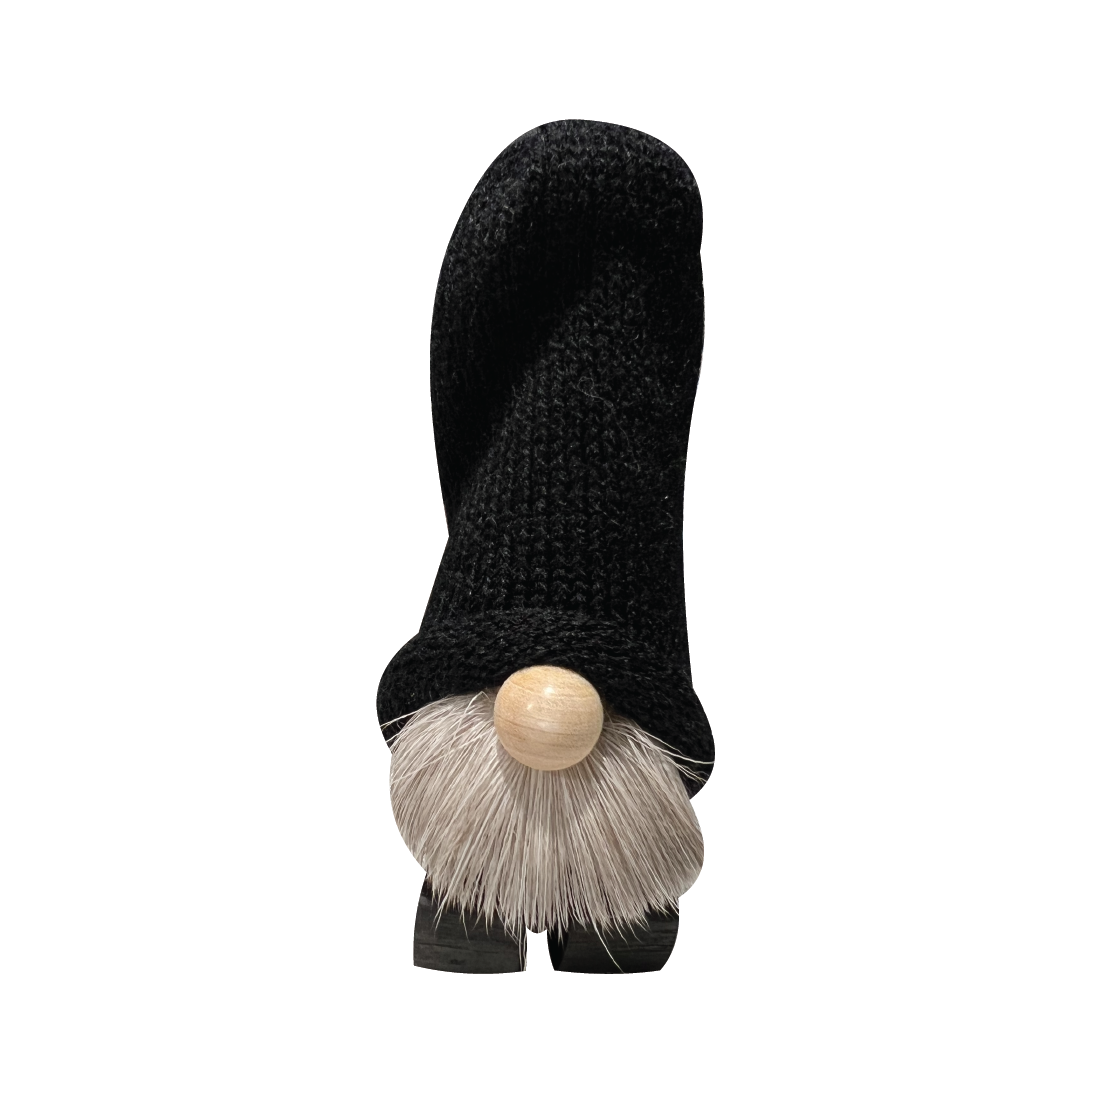 Tomte with Reindeer Beard, Knit Hat & Clogs